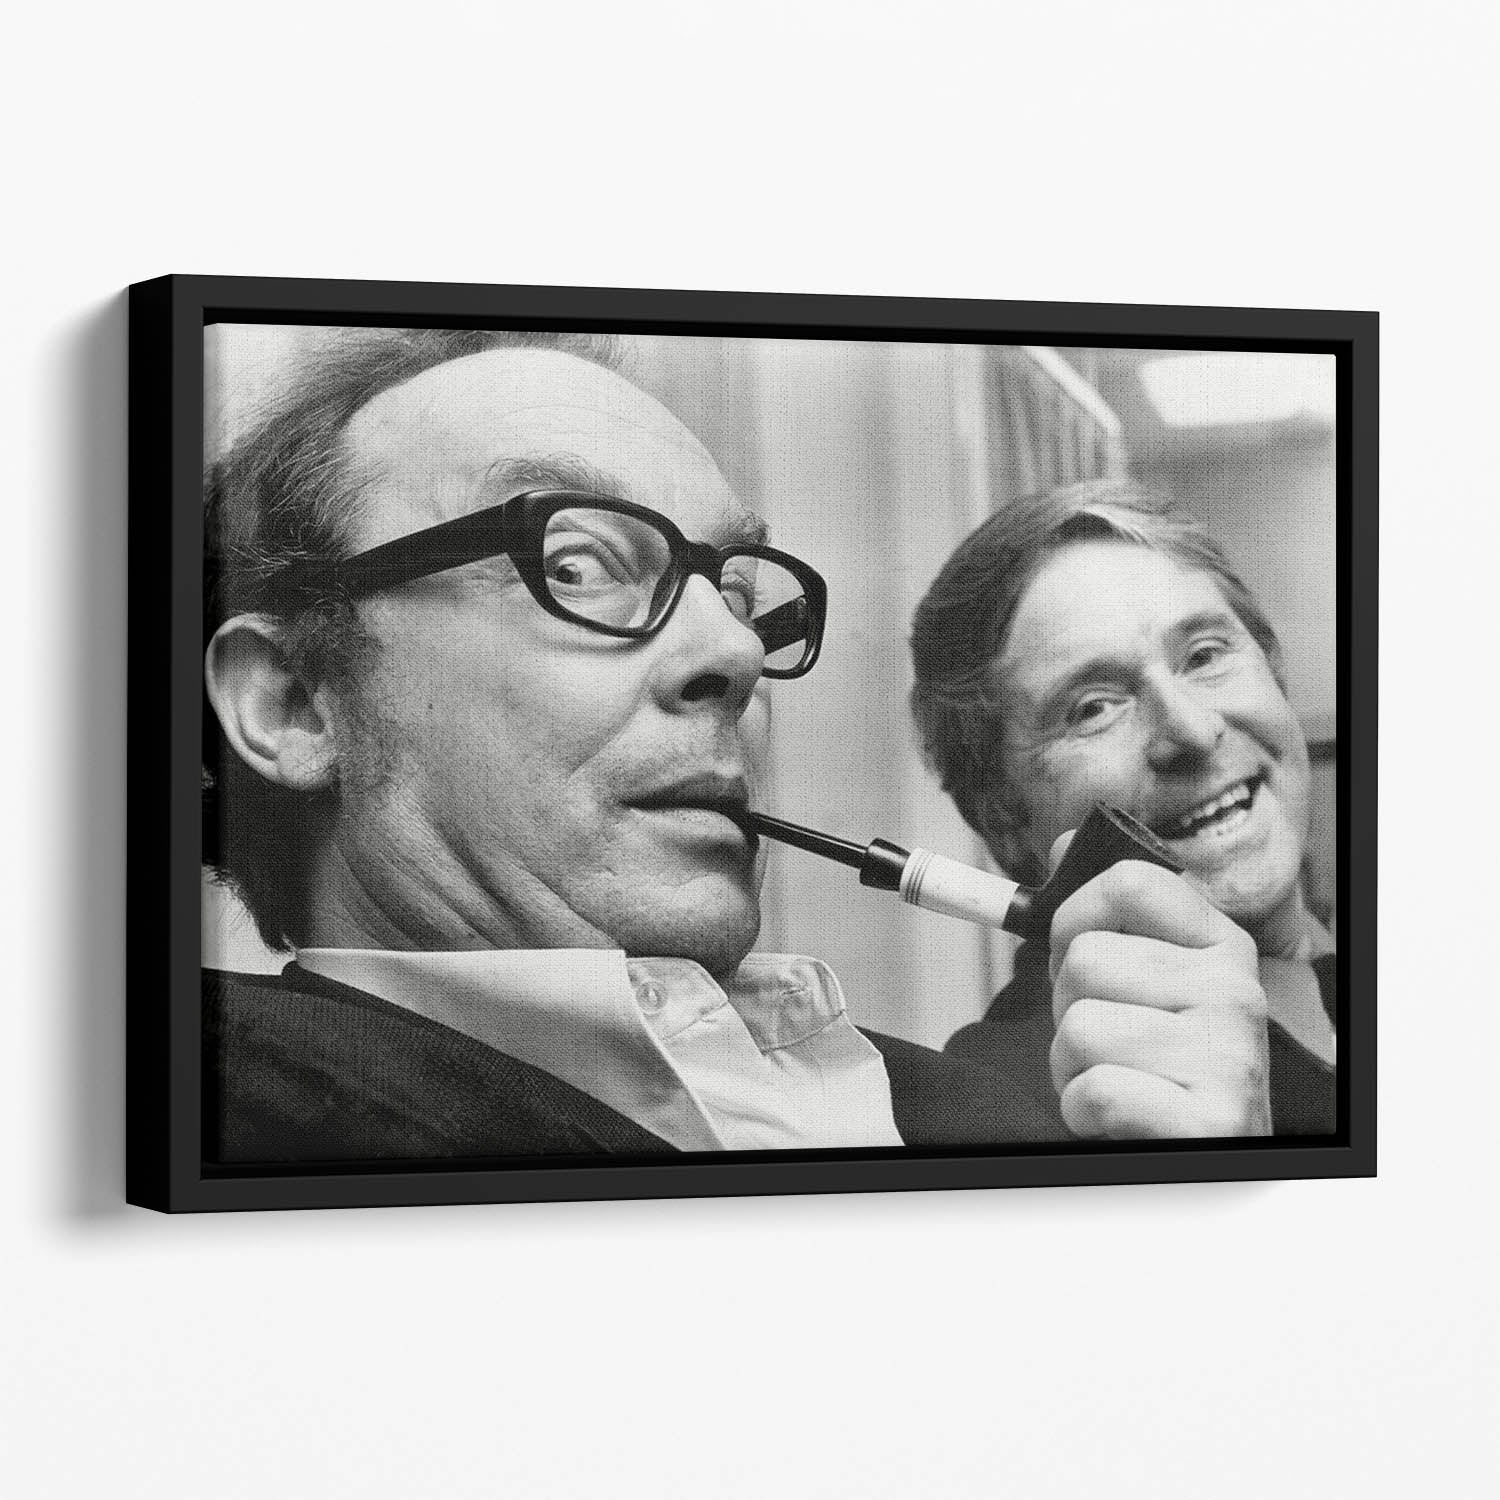 Morecambe and Wise in the 70s Floating Framed Canvas